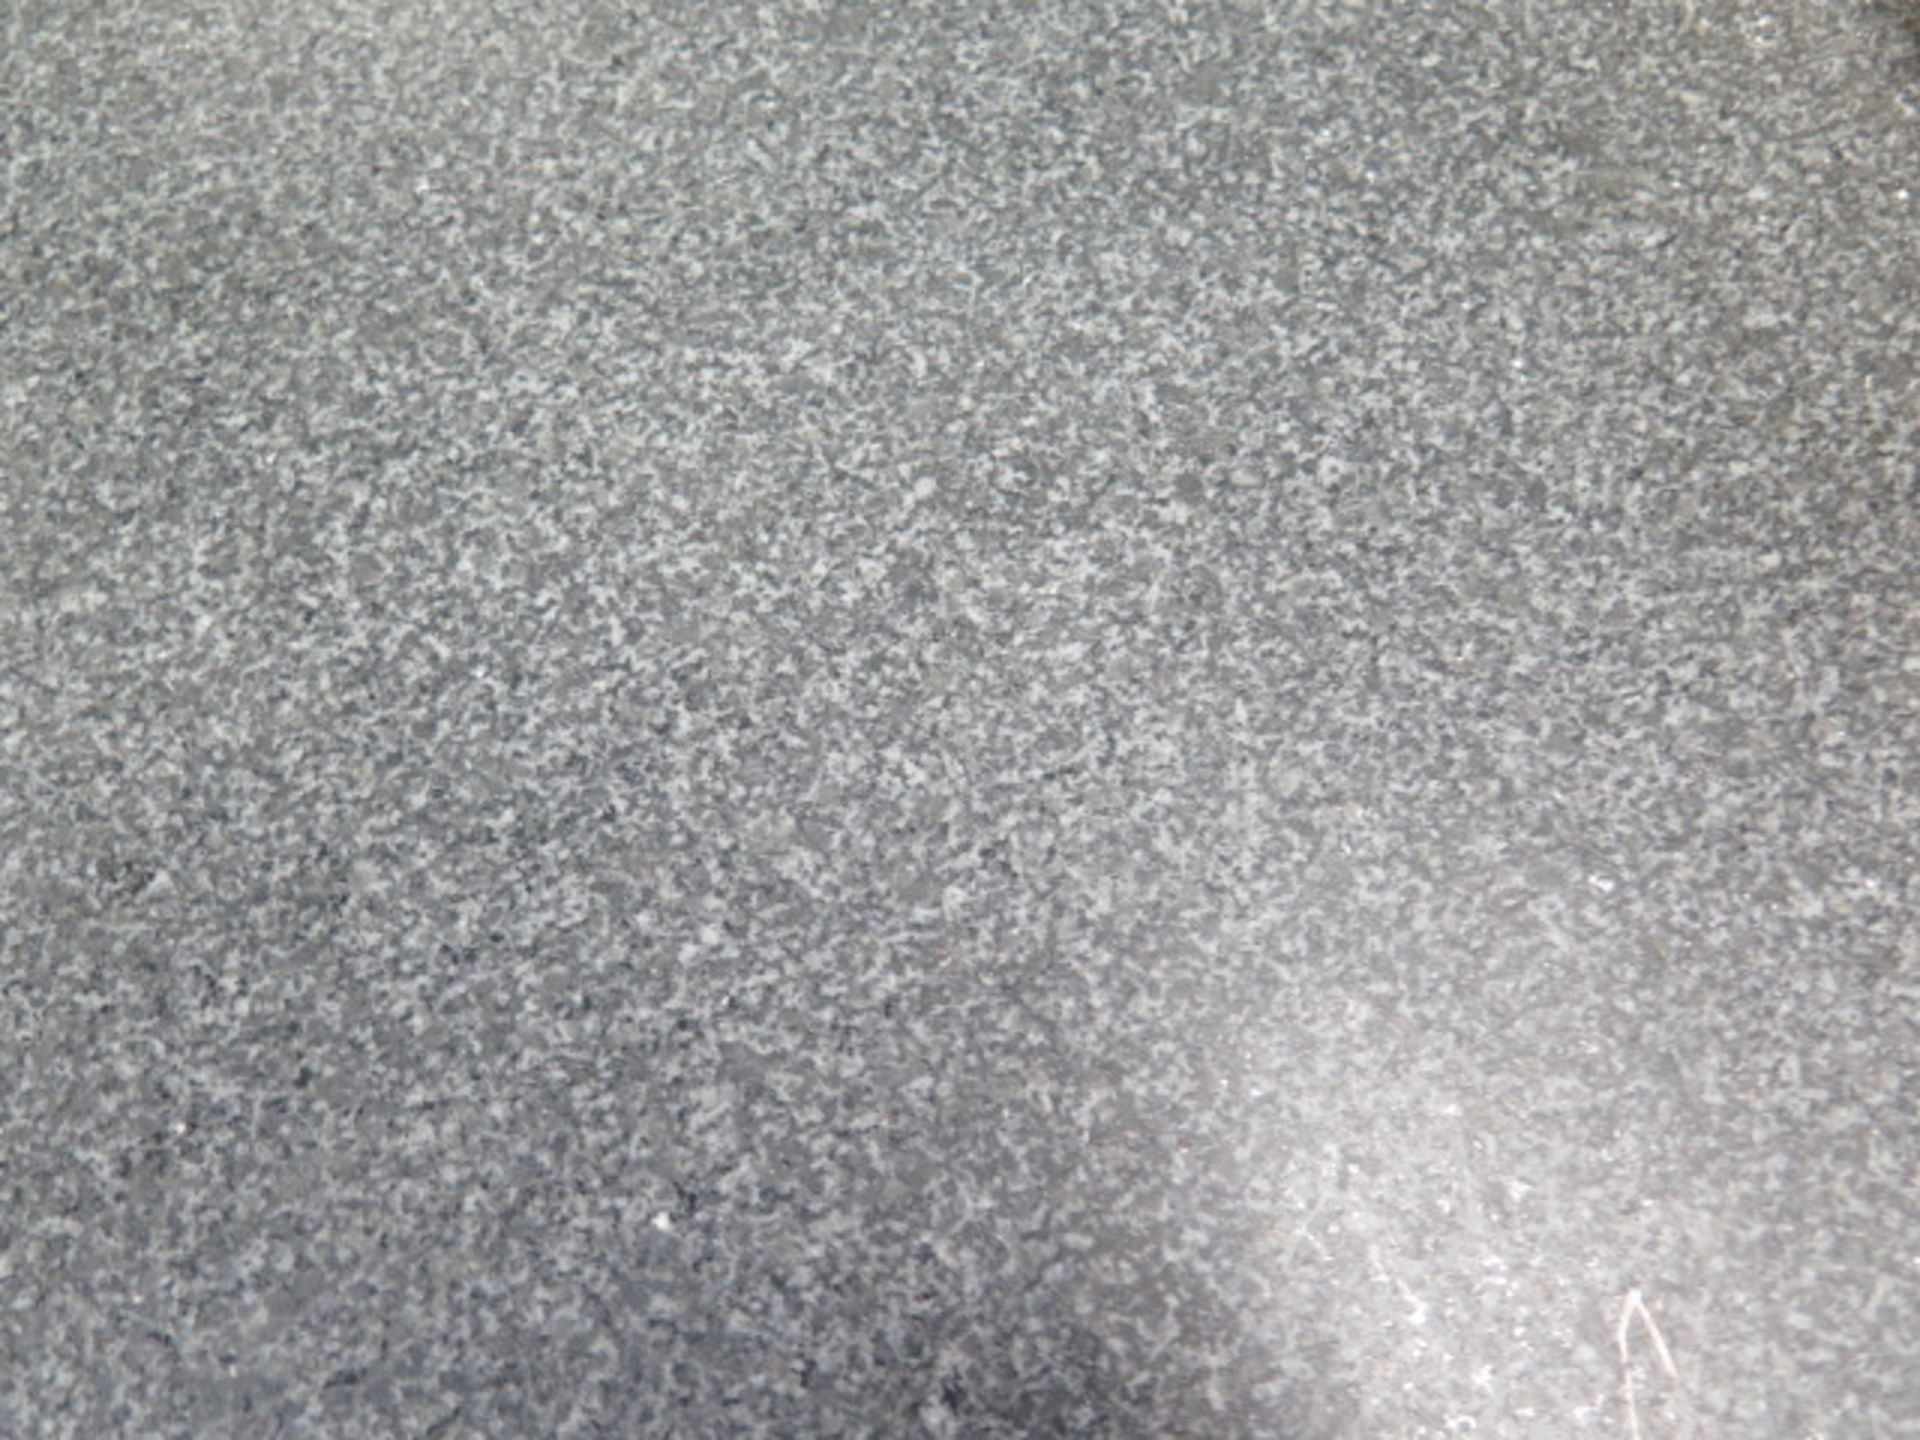 Mojave 48” x 72” x 6” Granite Surface Plate w/ Rolling Stand (SOLD AS-IS - NO WARRANTY) - Image 4 of 7